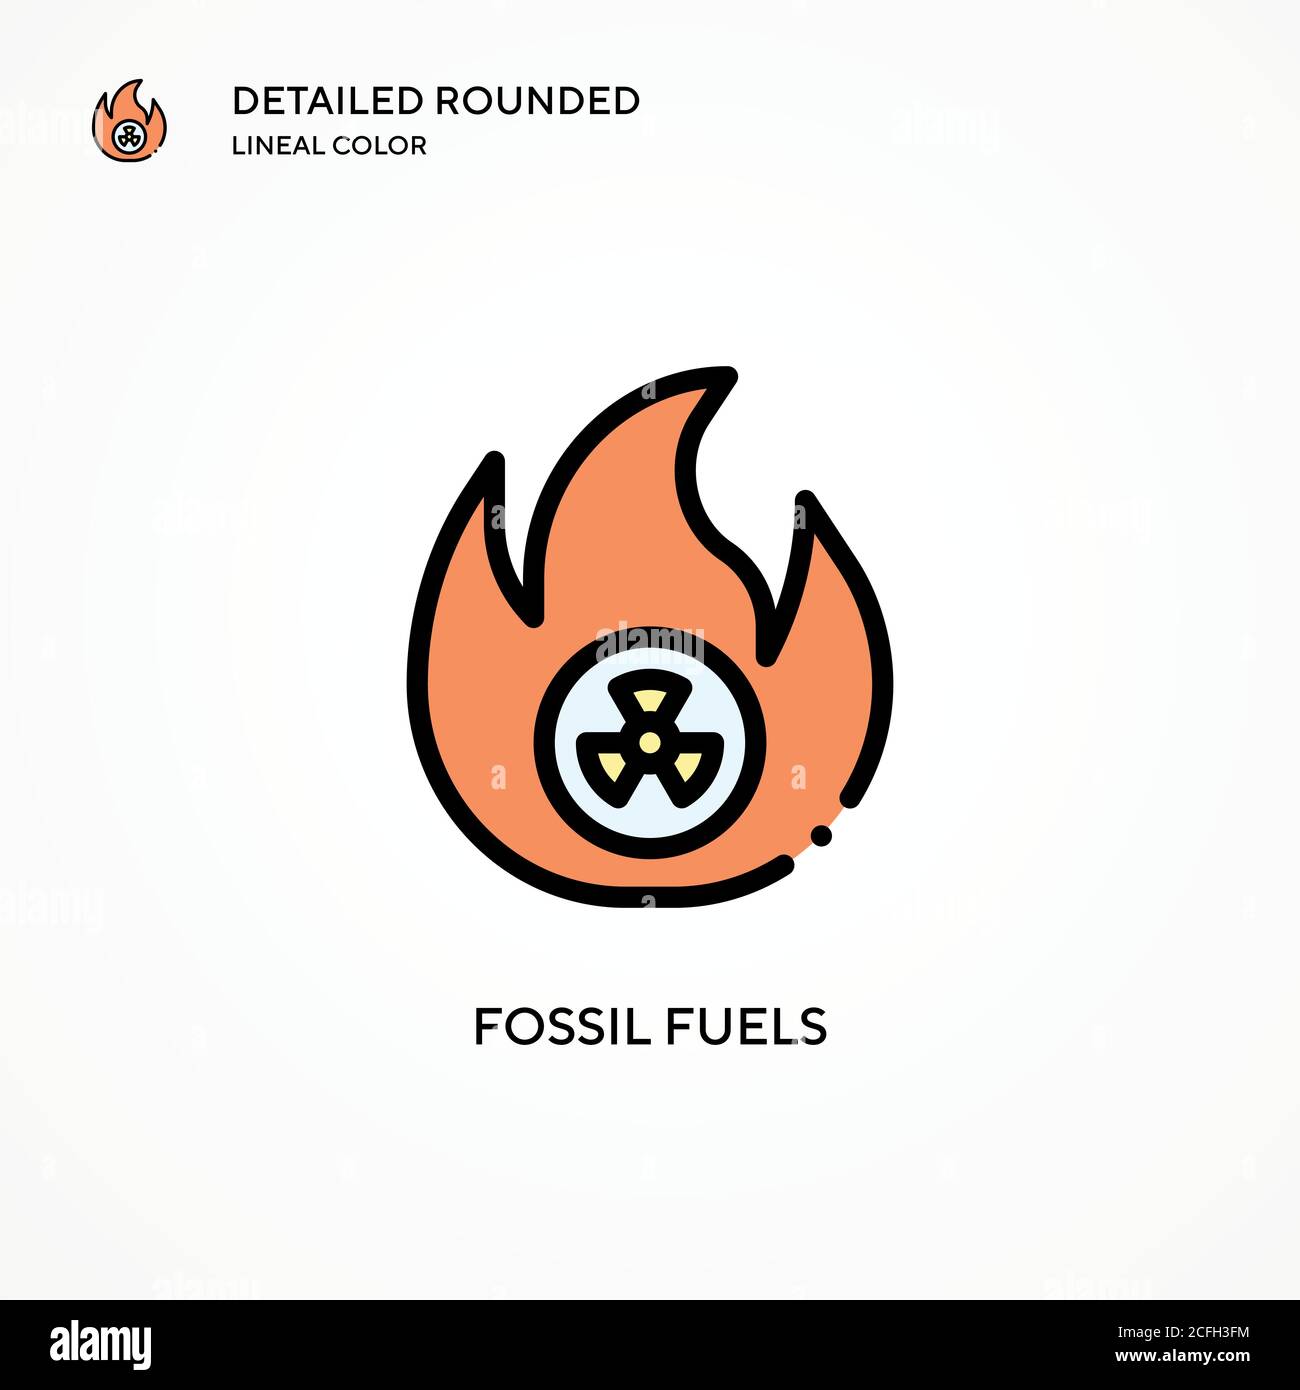 Fossil fuels vector icon. Modern vector illustration concepts. Easy to edit and customize. Stock Vector